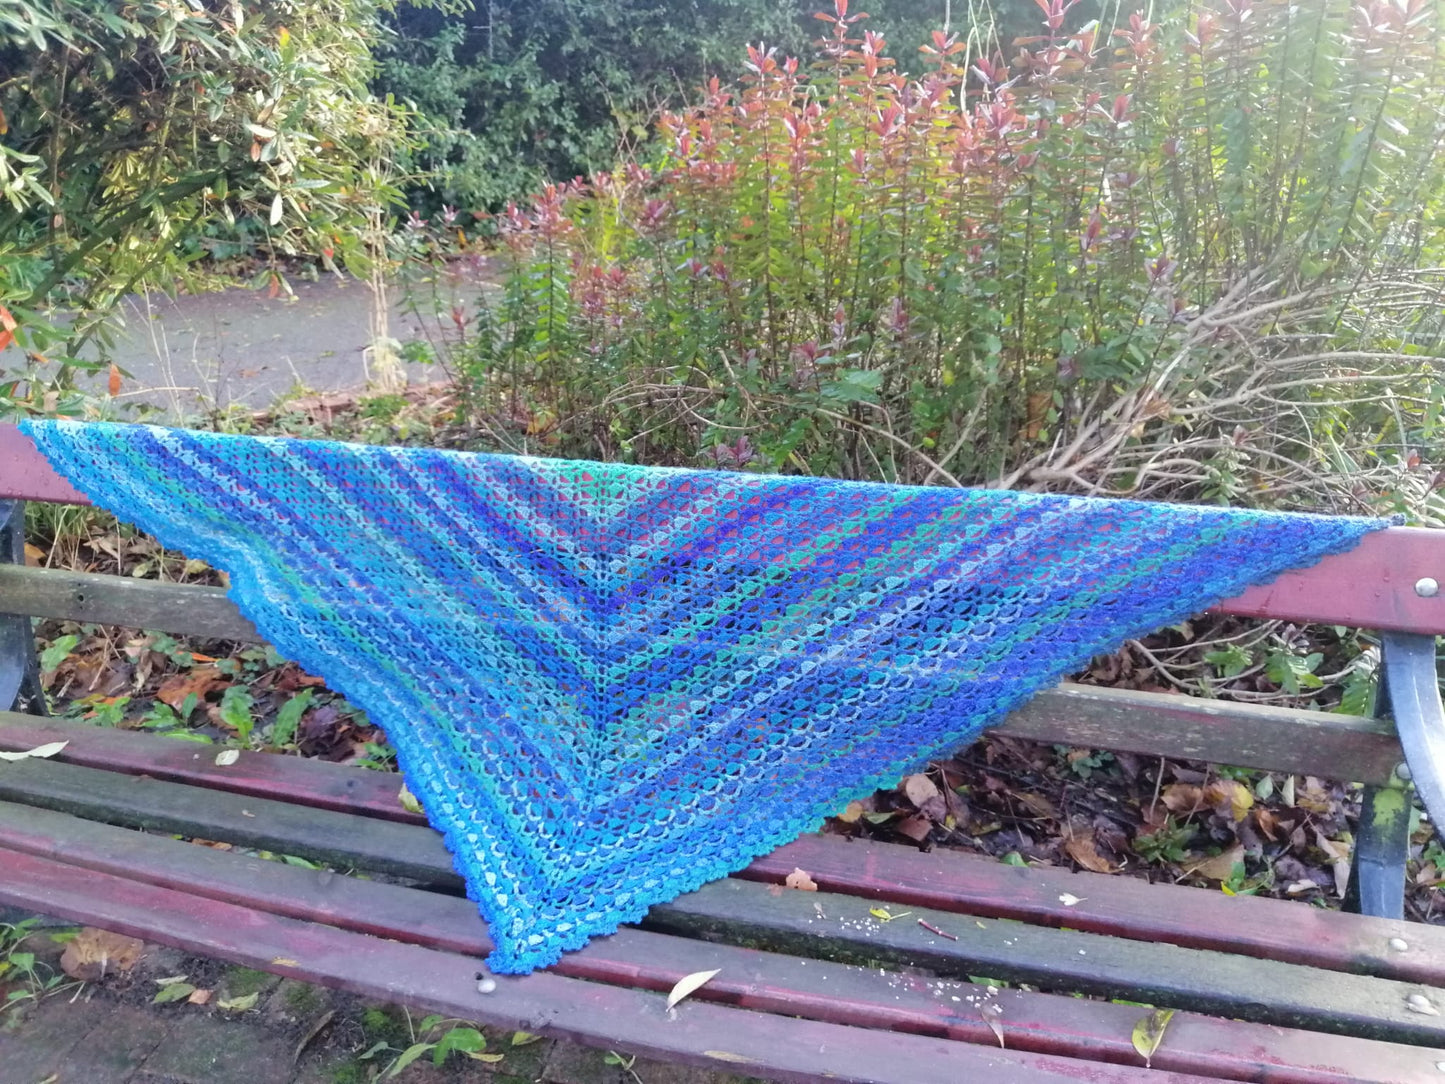 An image of our 'Blue Geode Crochet Shawl' where you can the full lace pattern and the various shades of blues and greens.